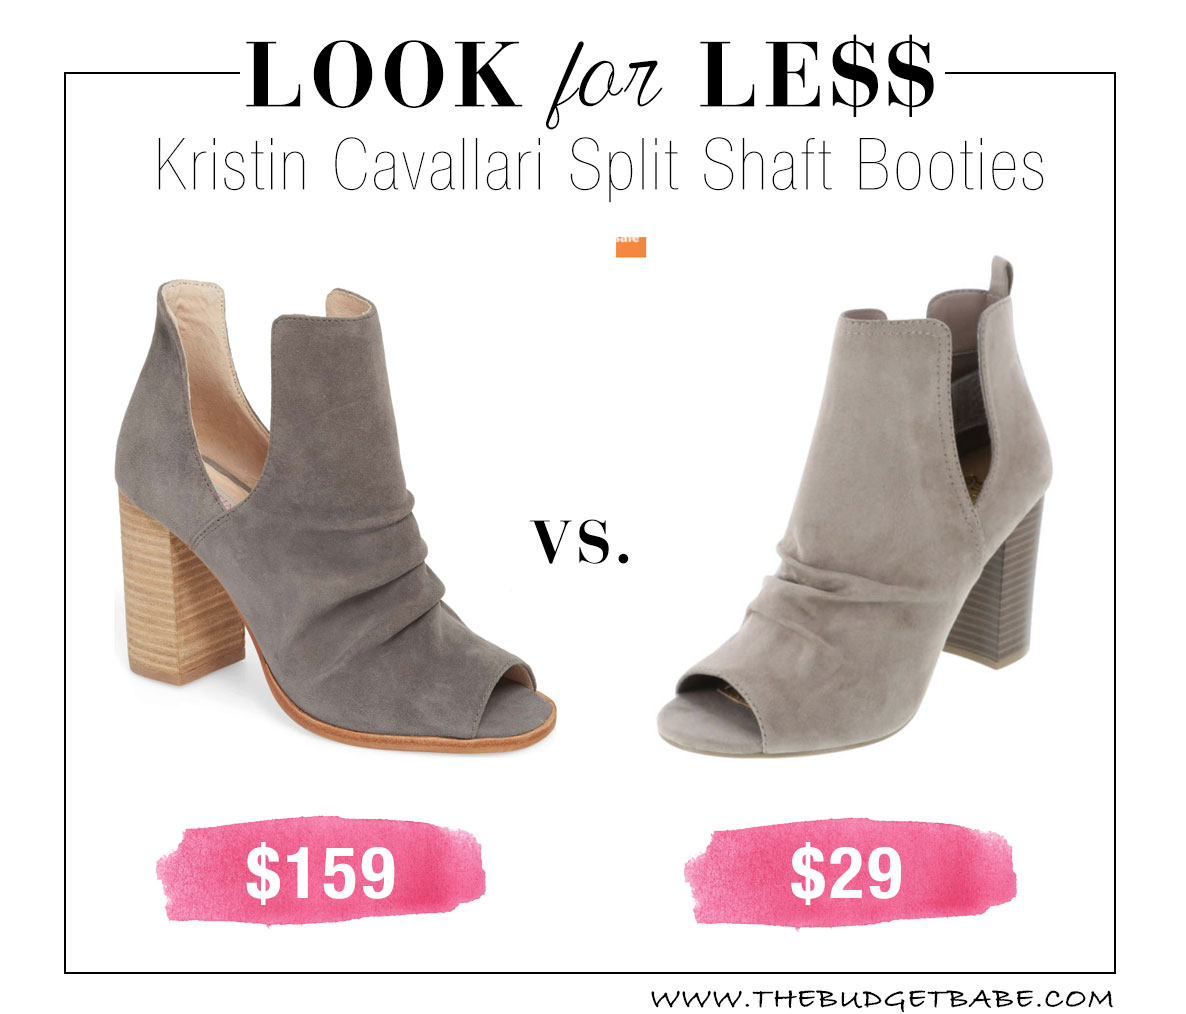 Payless has a great dupe for these Kristin Cavallari ankle booties!